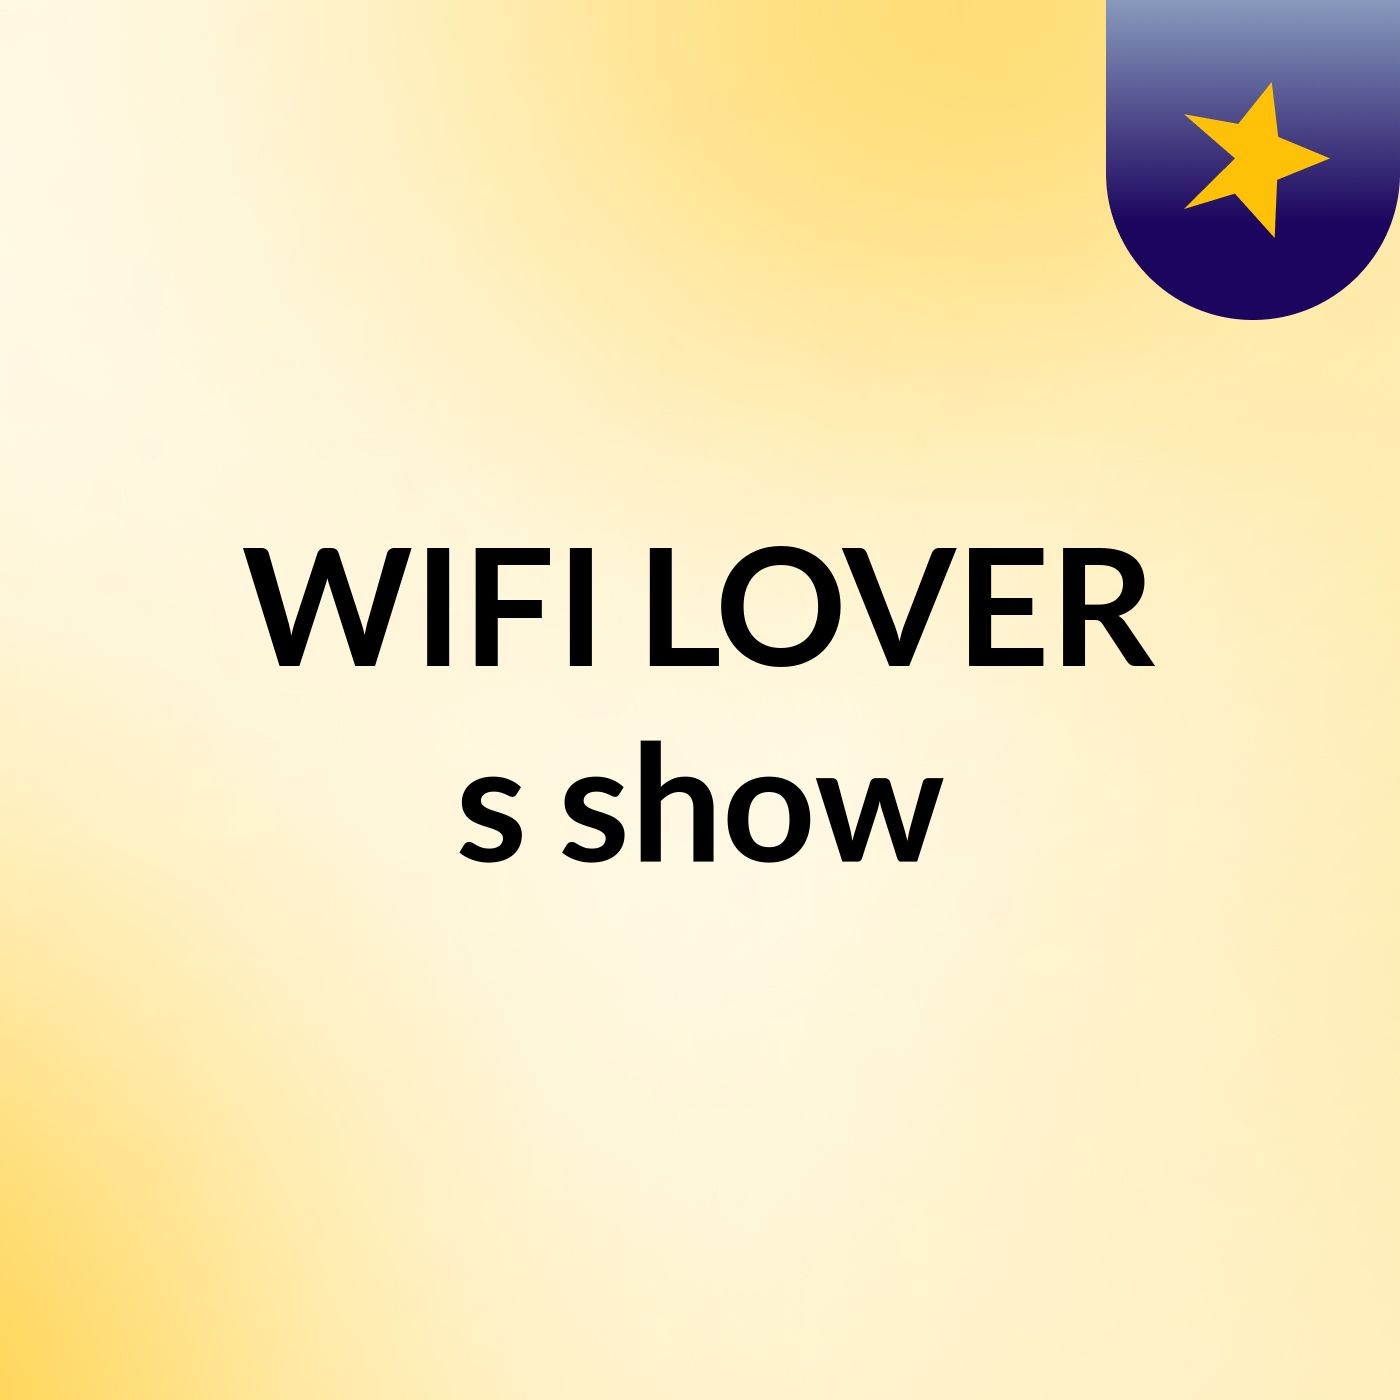 Episode 2 - WIFI LOVER's show